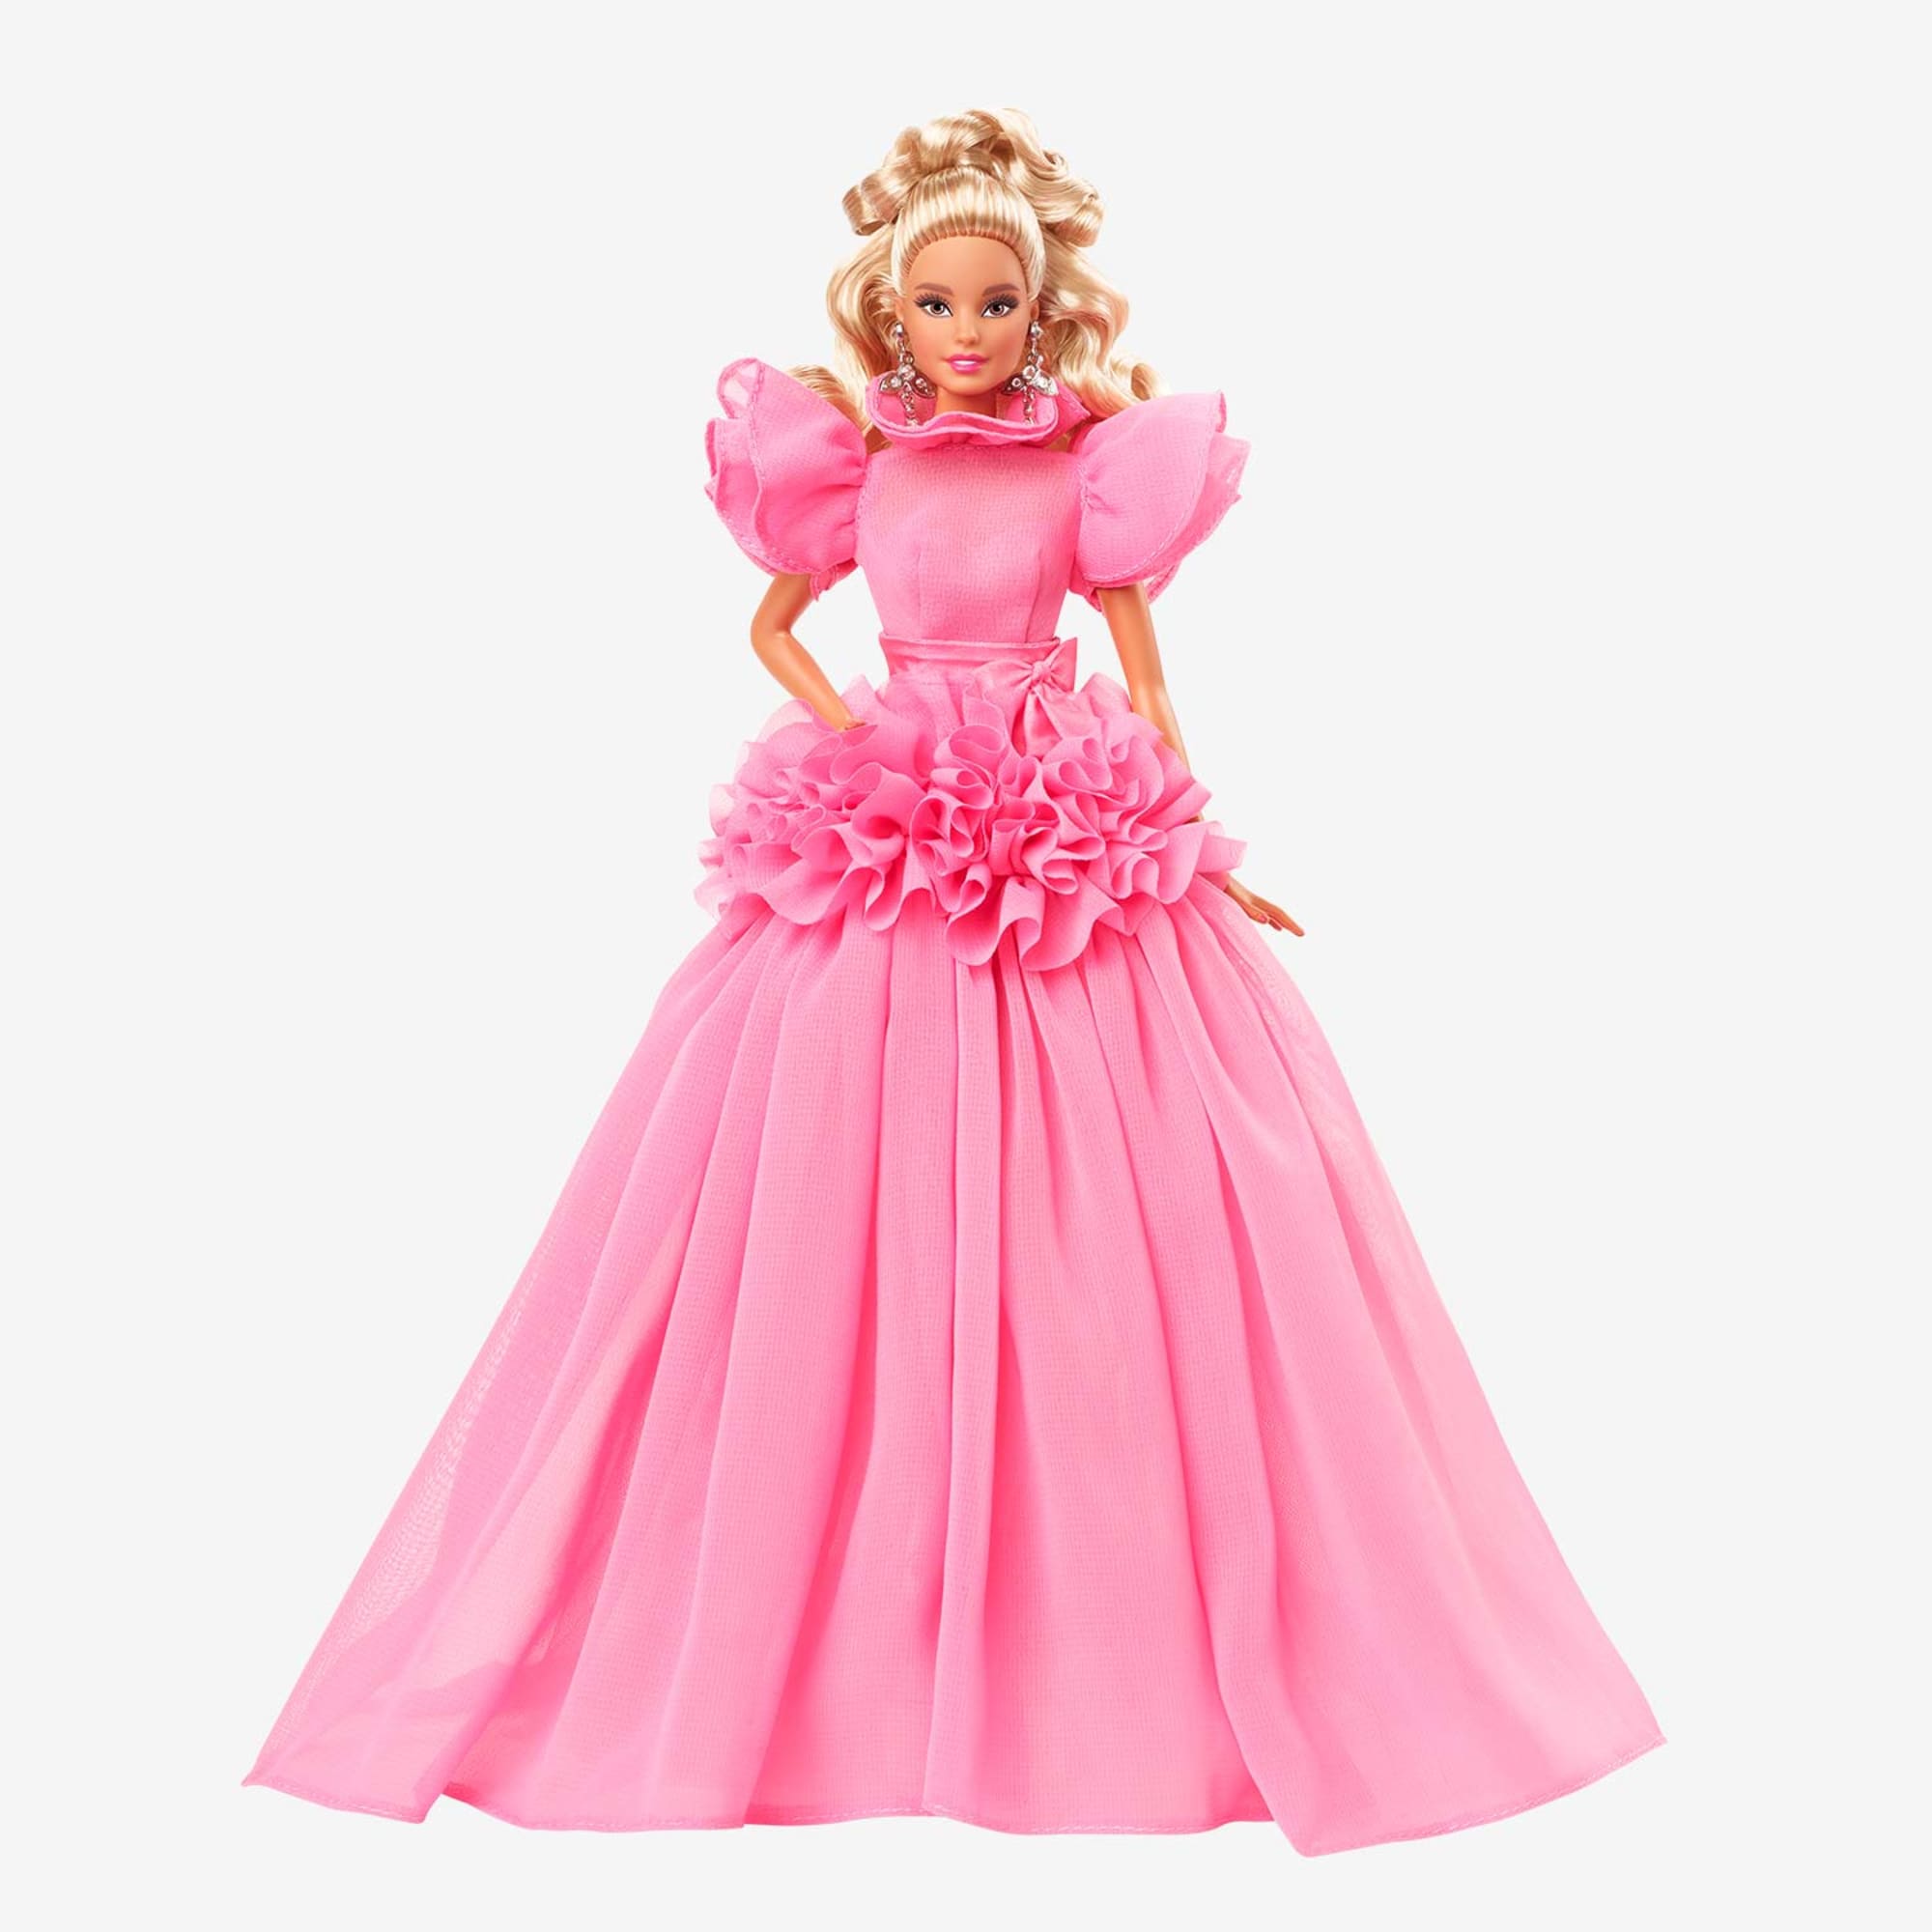 Barbie Pink Collection Doll 3 – Mattel Creations